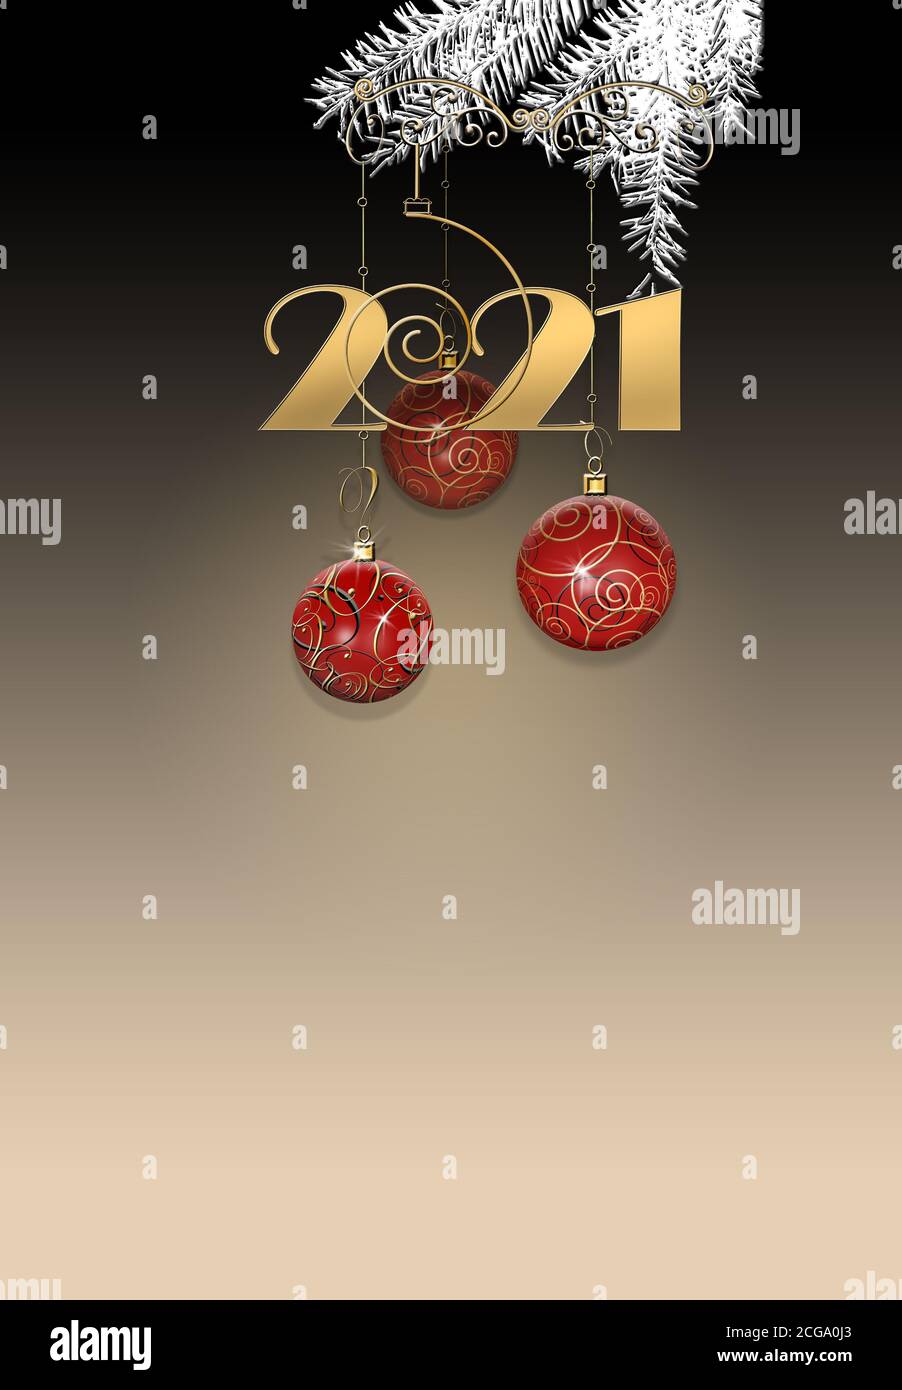 Luxury elegant Christmas New Year ornament with red gold baubles, hanging digit 2021 on black gold background. Vertical 2021 New Year card. Place for text, copy space, mock up 3D Illustration. Stock Photo